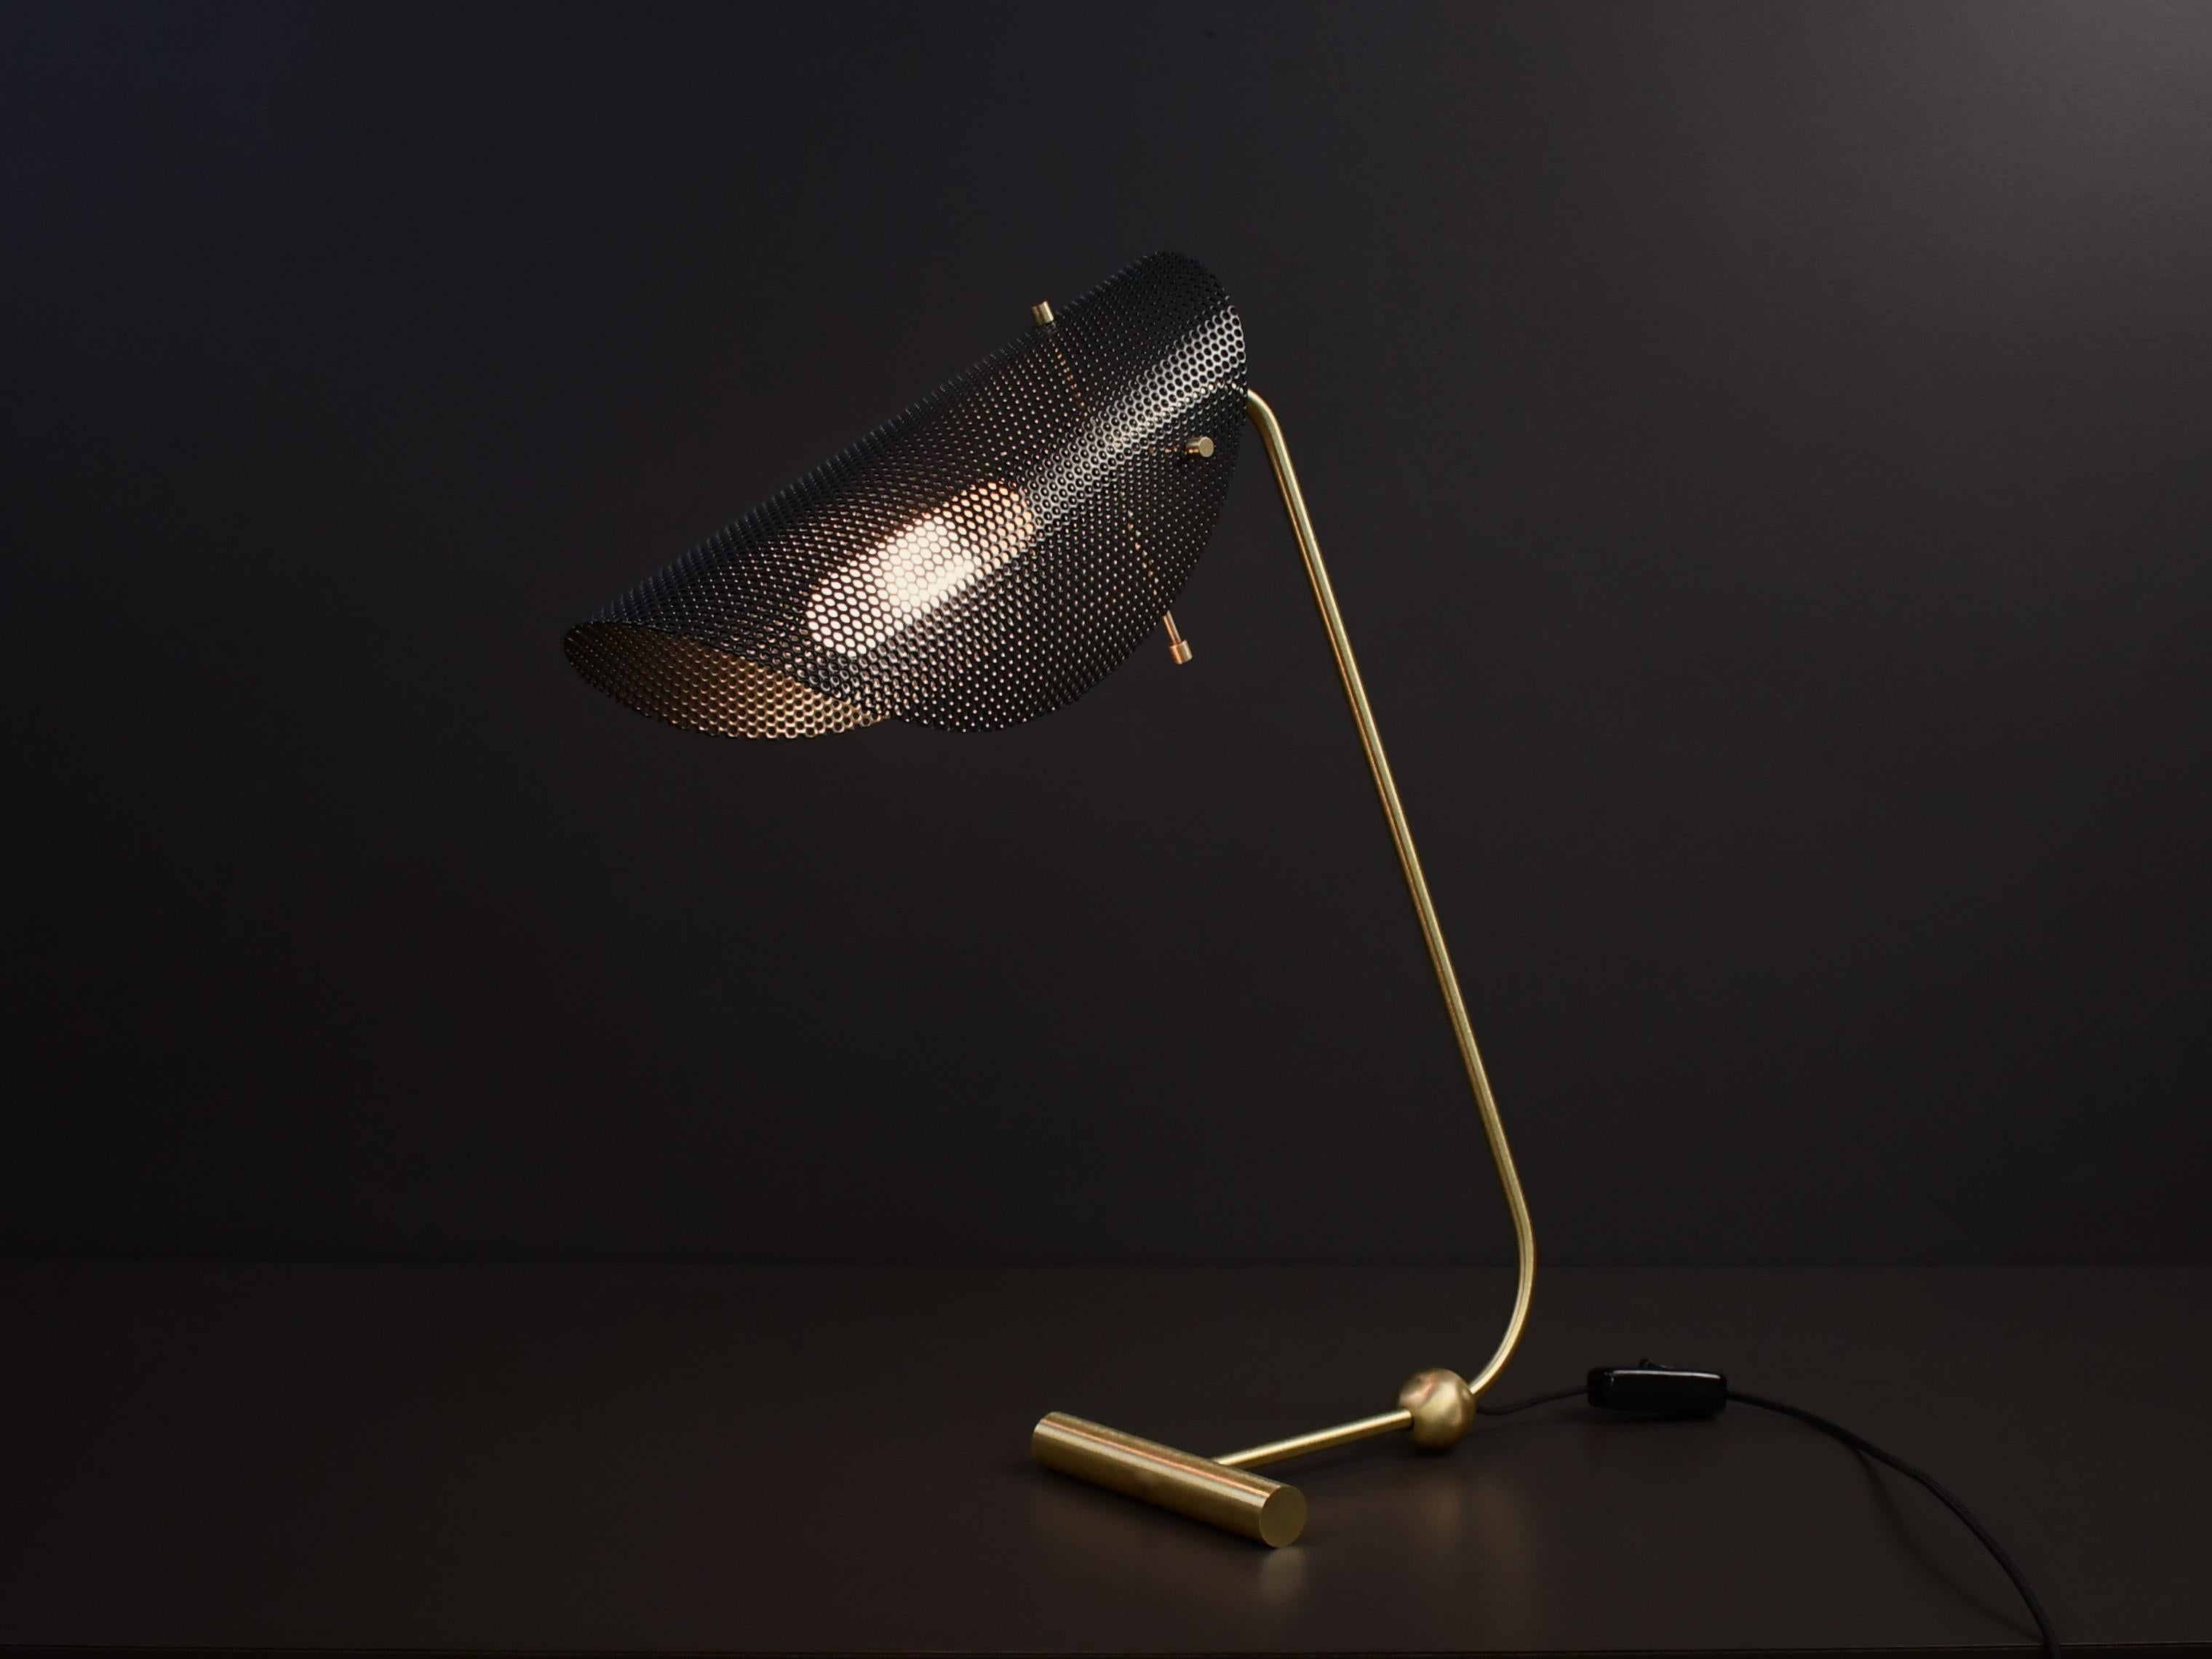 The Tulle table lamp or desk lamp is an architectural piece that works well in both modern and transitional interiors. Shown here in our matte black enamel and natural brass hardware. Available in any of our 36 enamel colors and 7 metal